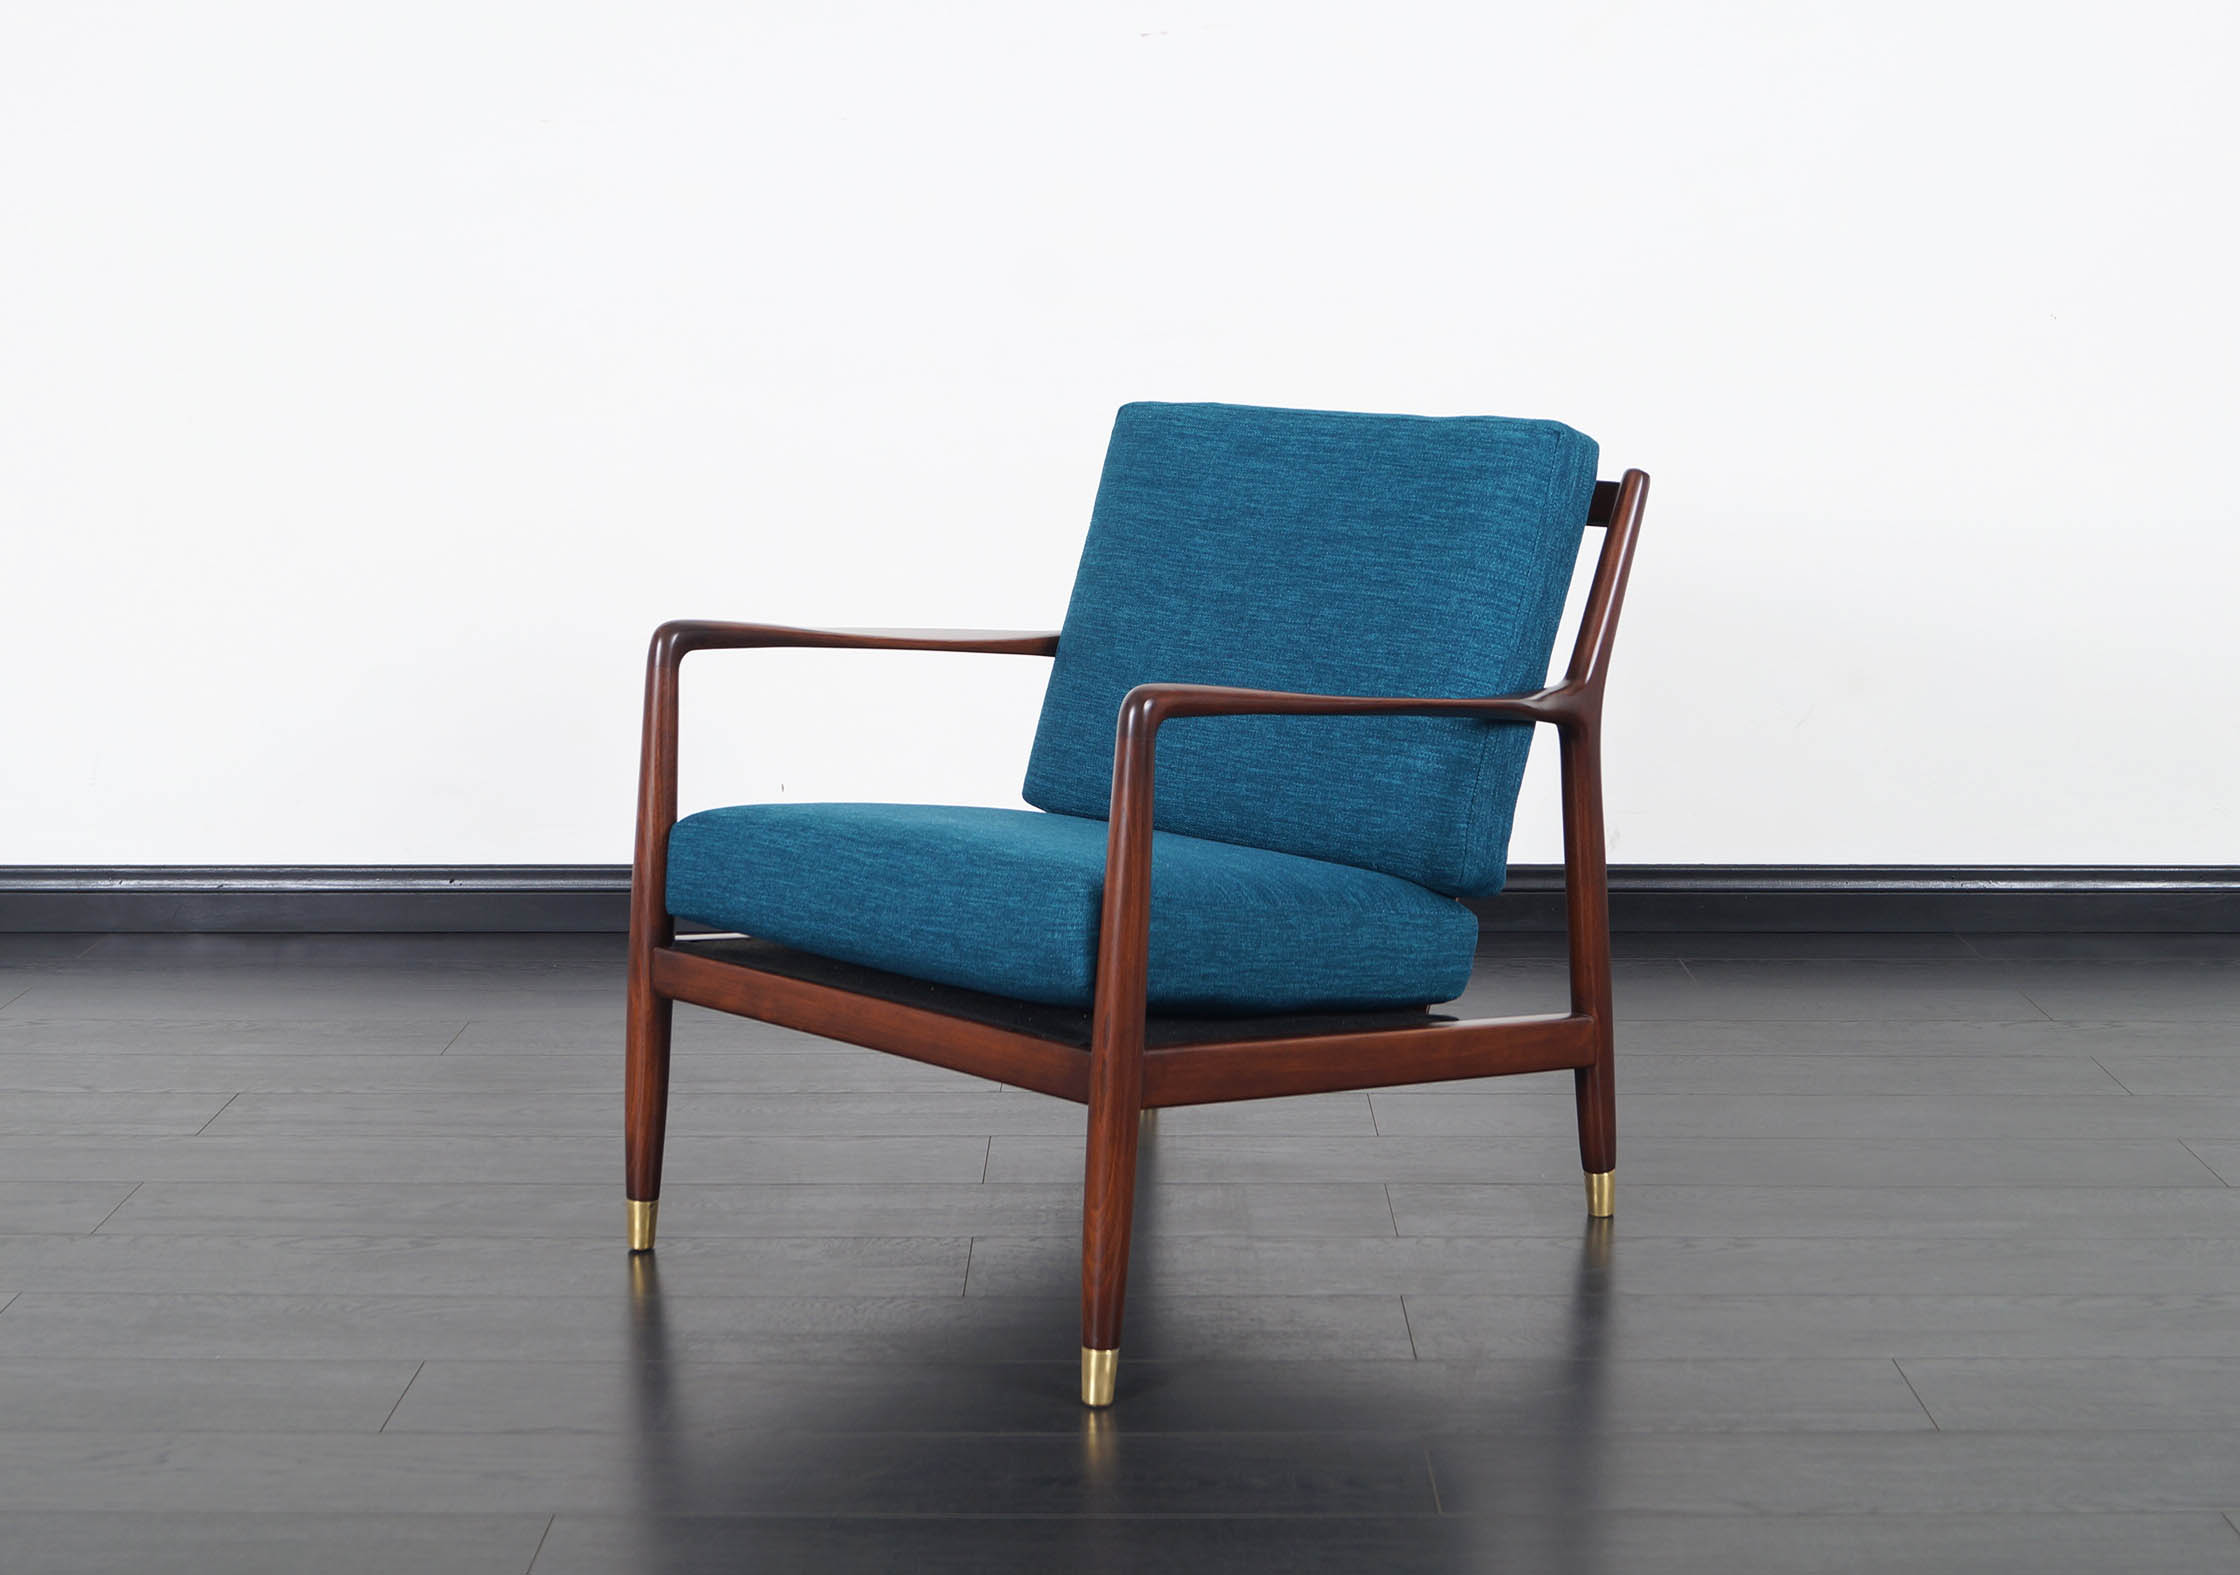 Vintage Lounge Chairs by Folke Ohlsson